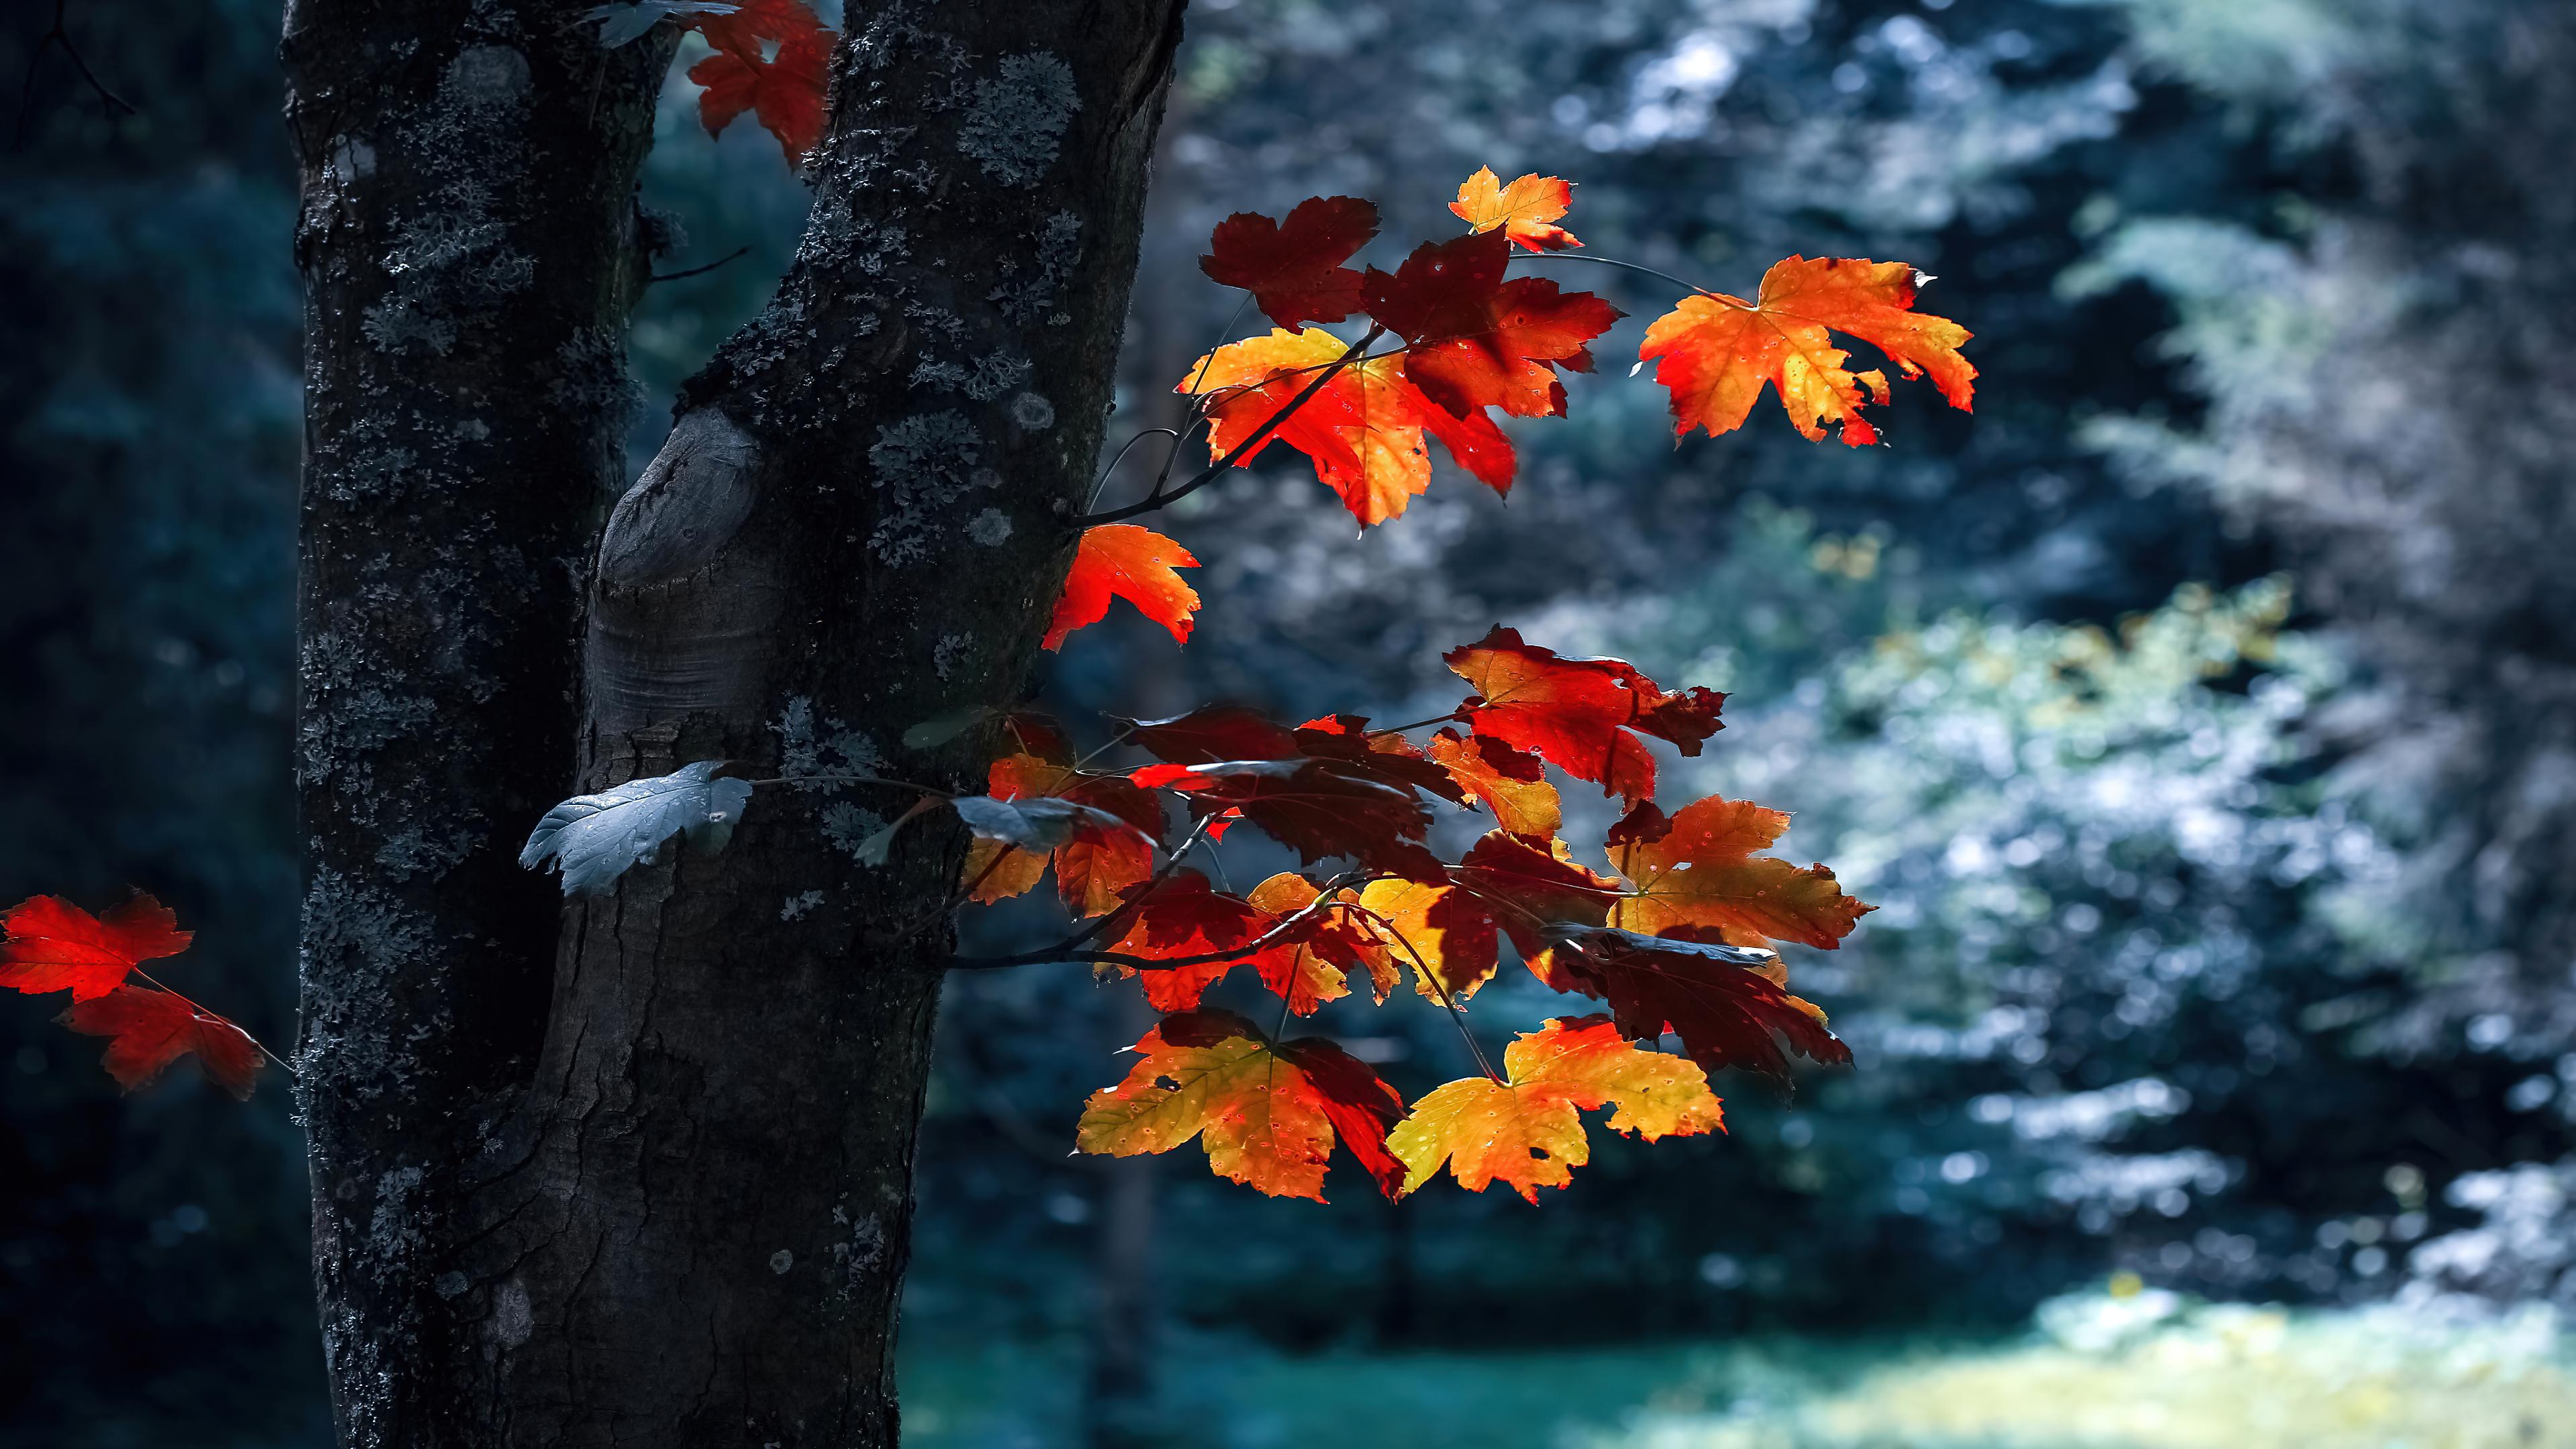 Leaves 4K wallpaper for your desktop or mobile screen free and easy to download